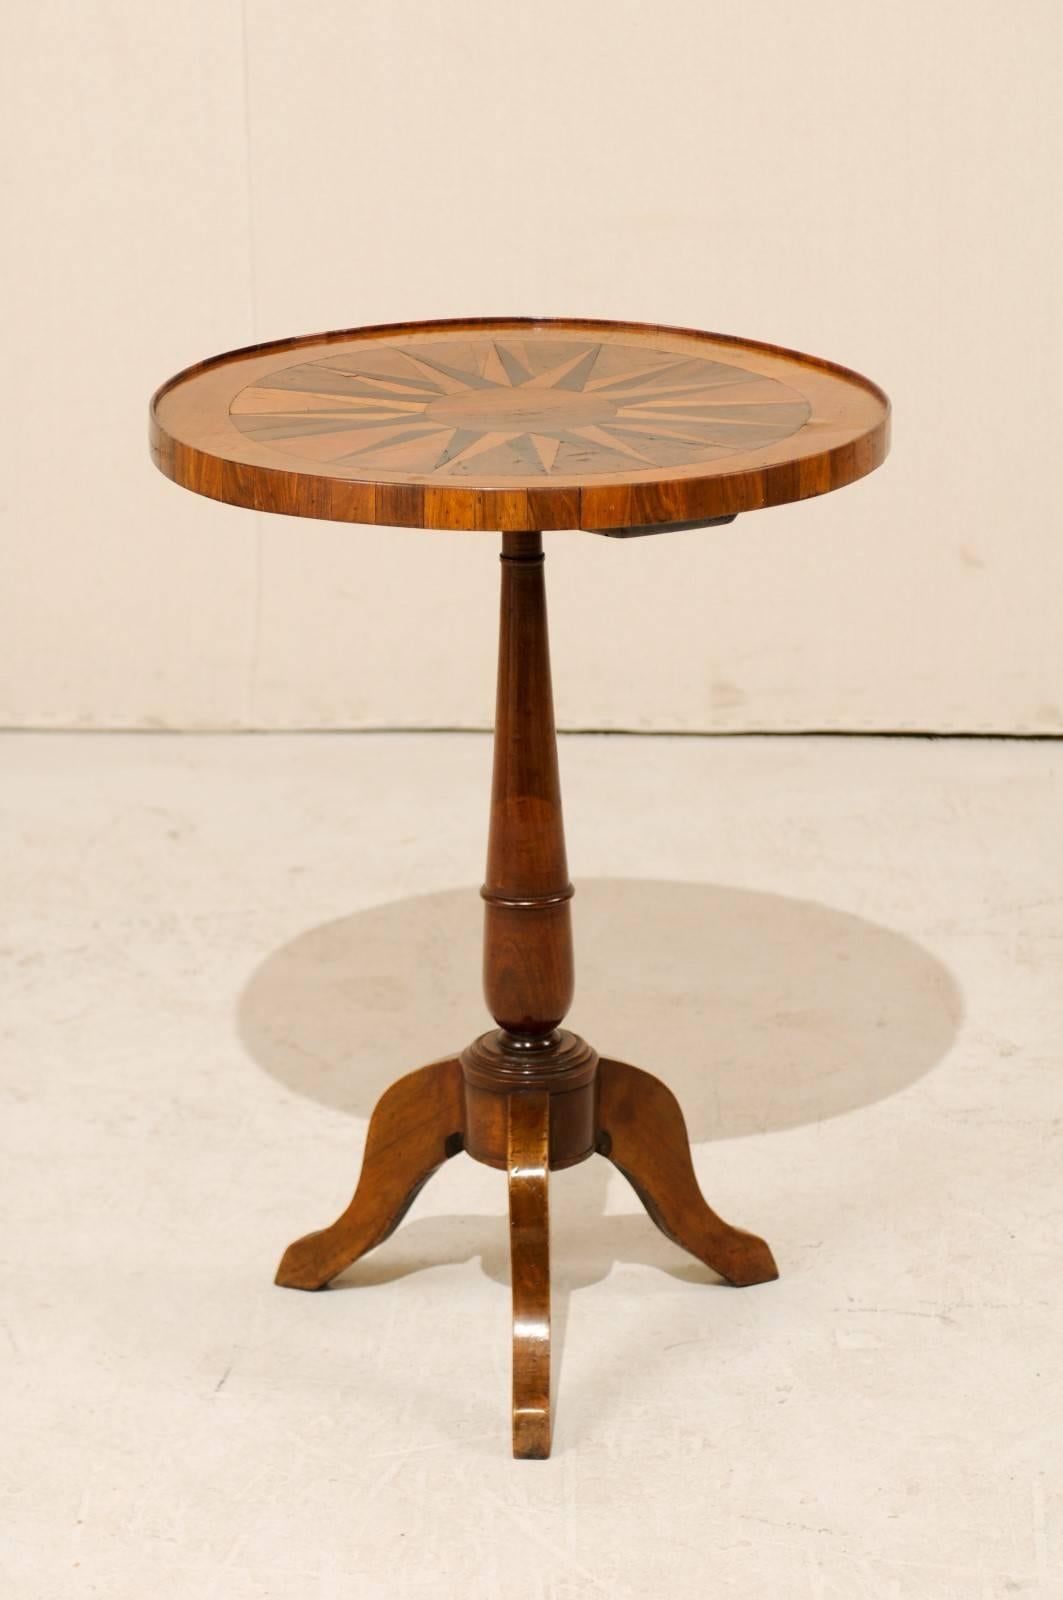 Italian 19th Century Round Fruitwood Pedestal Table with Compass Star Inlay 2